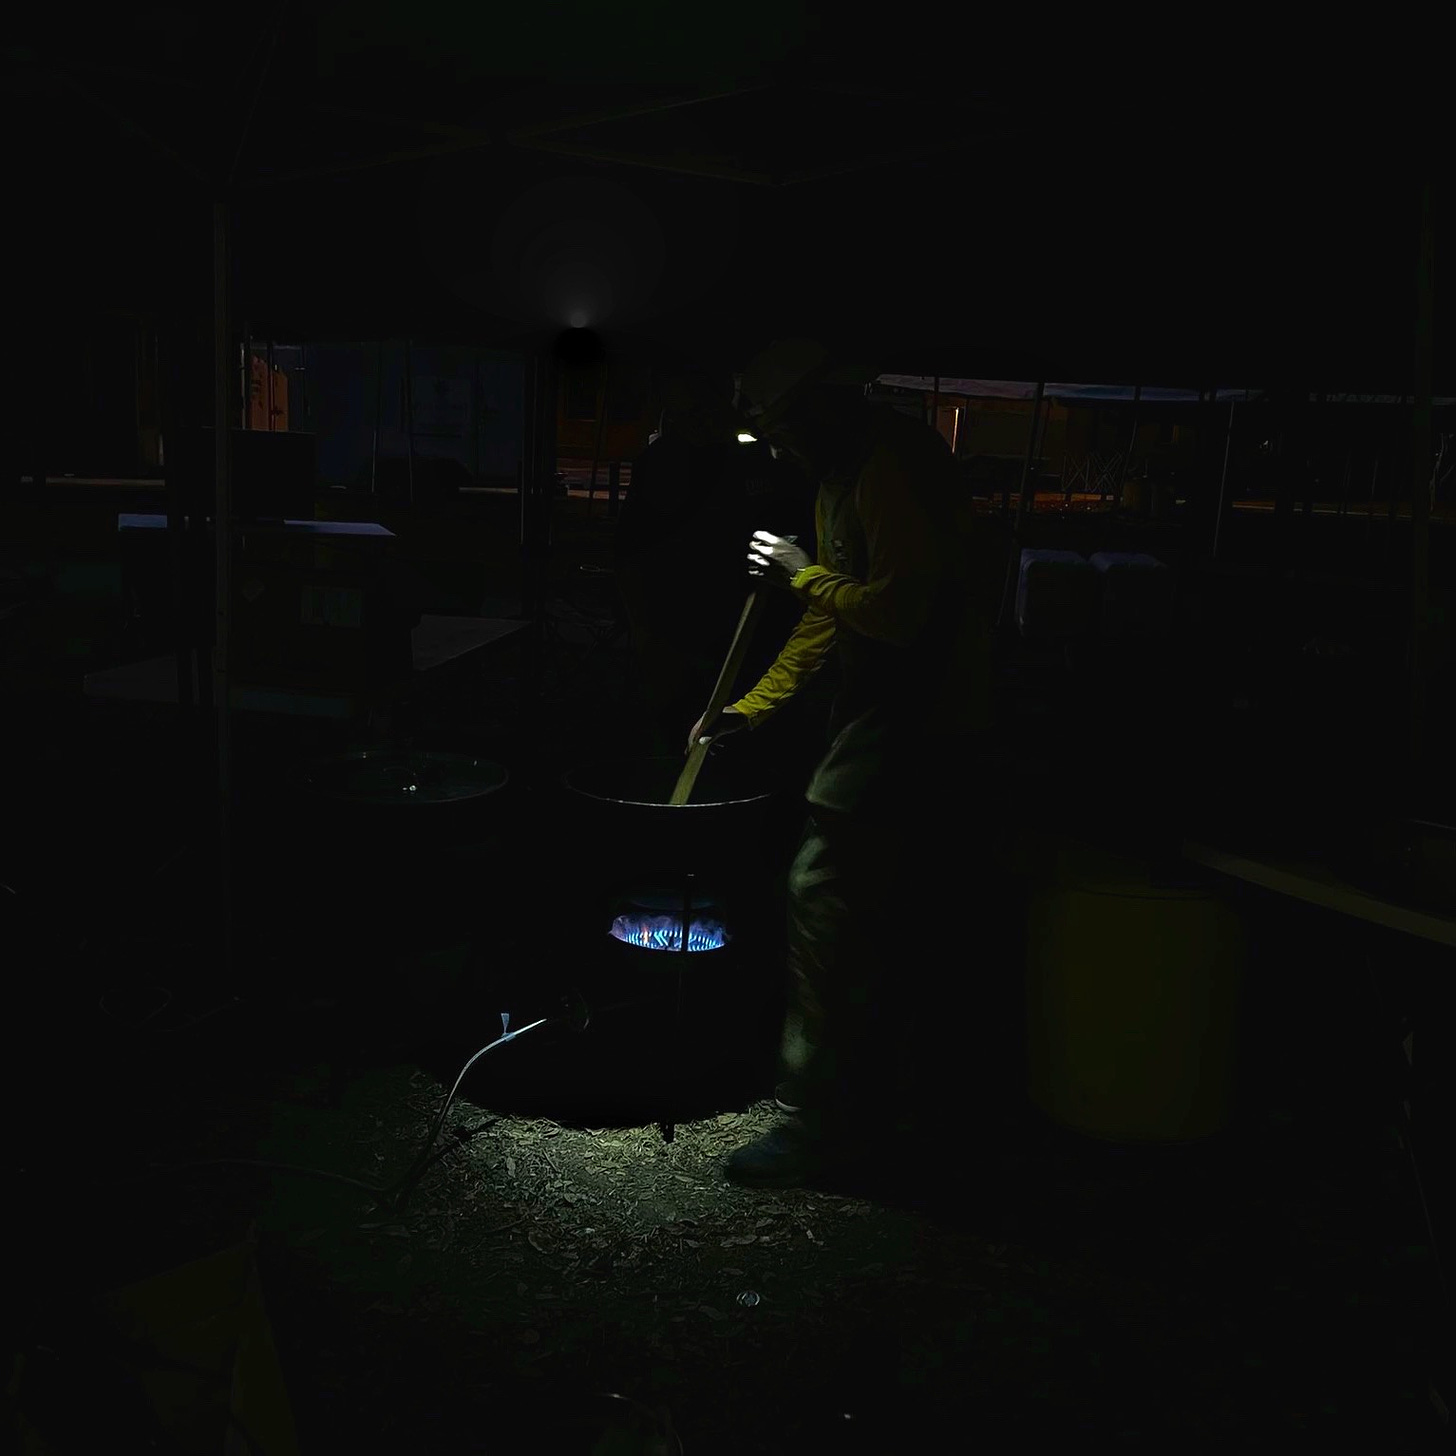 A man wearing a headlamp uses a large oar-like tool to stir a large pot set over a blue flame in an otherwise dark image, taken before dawn.